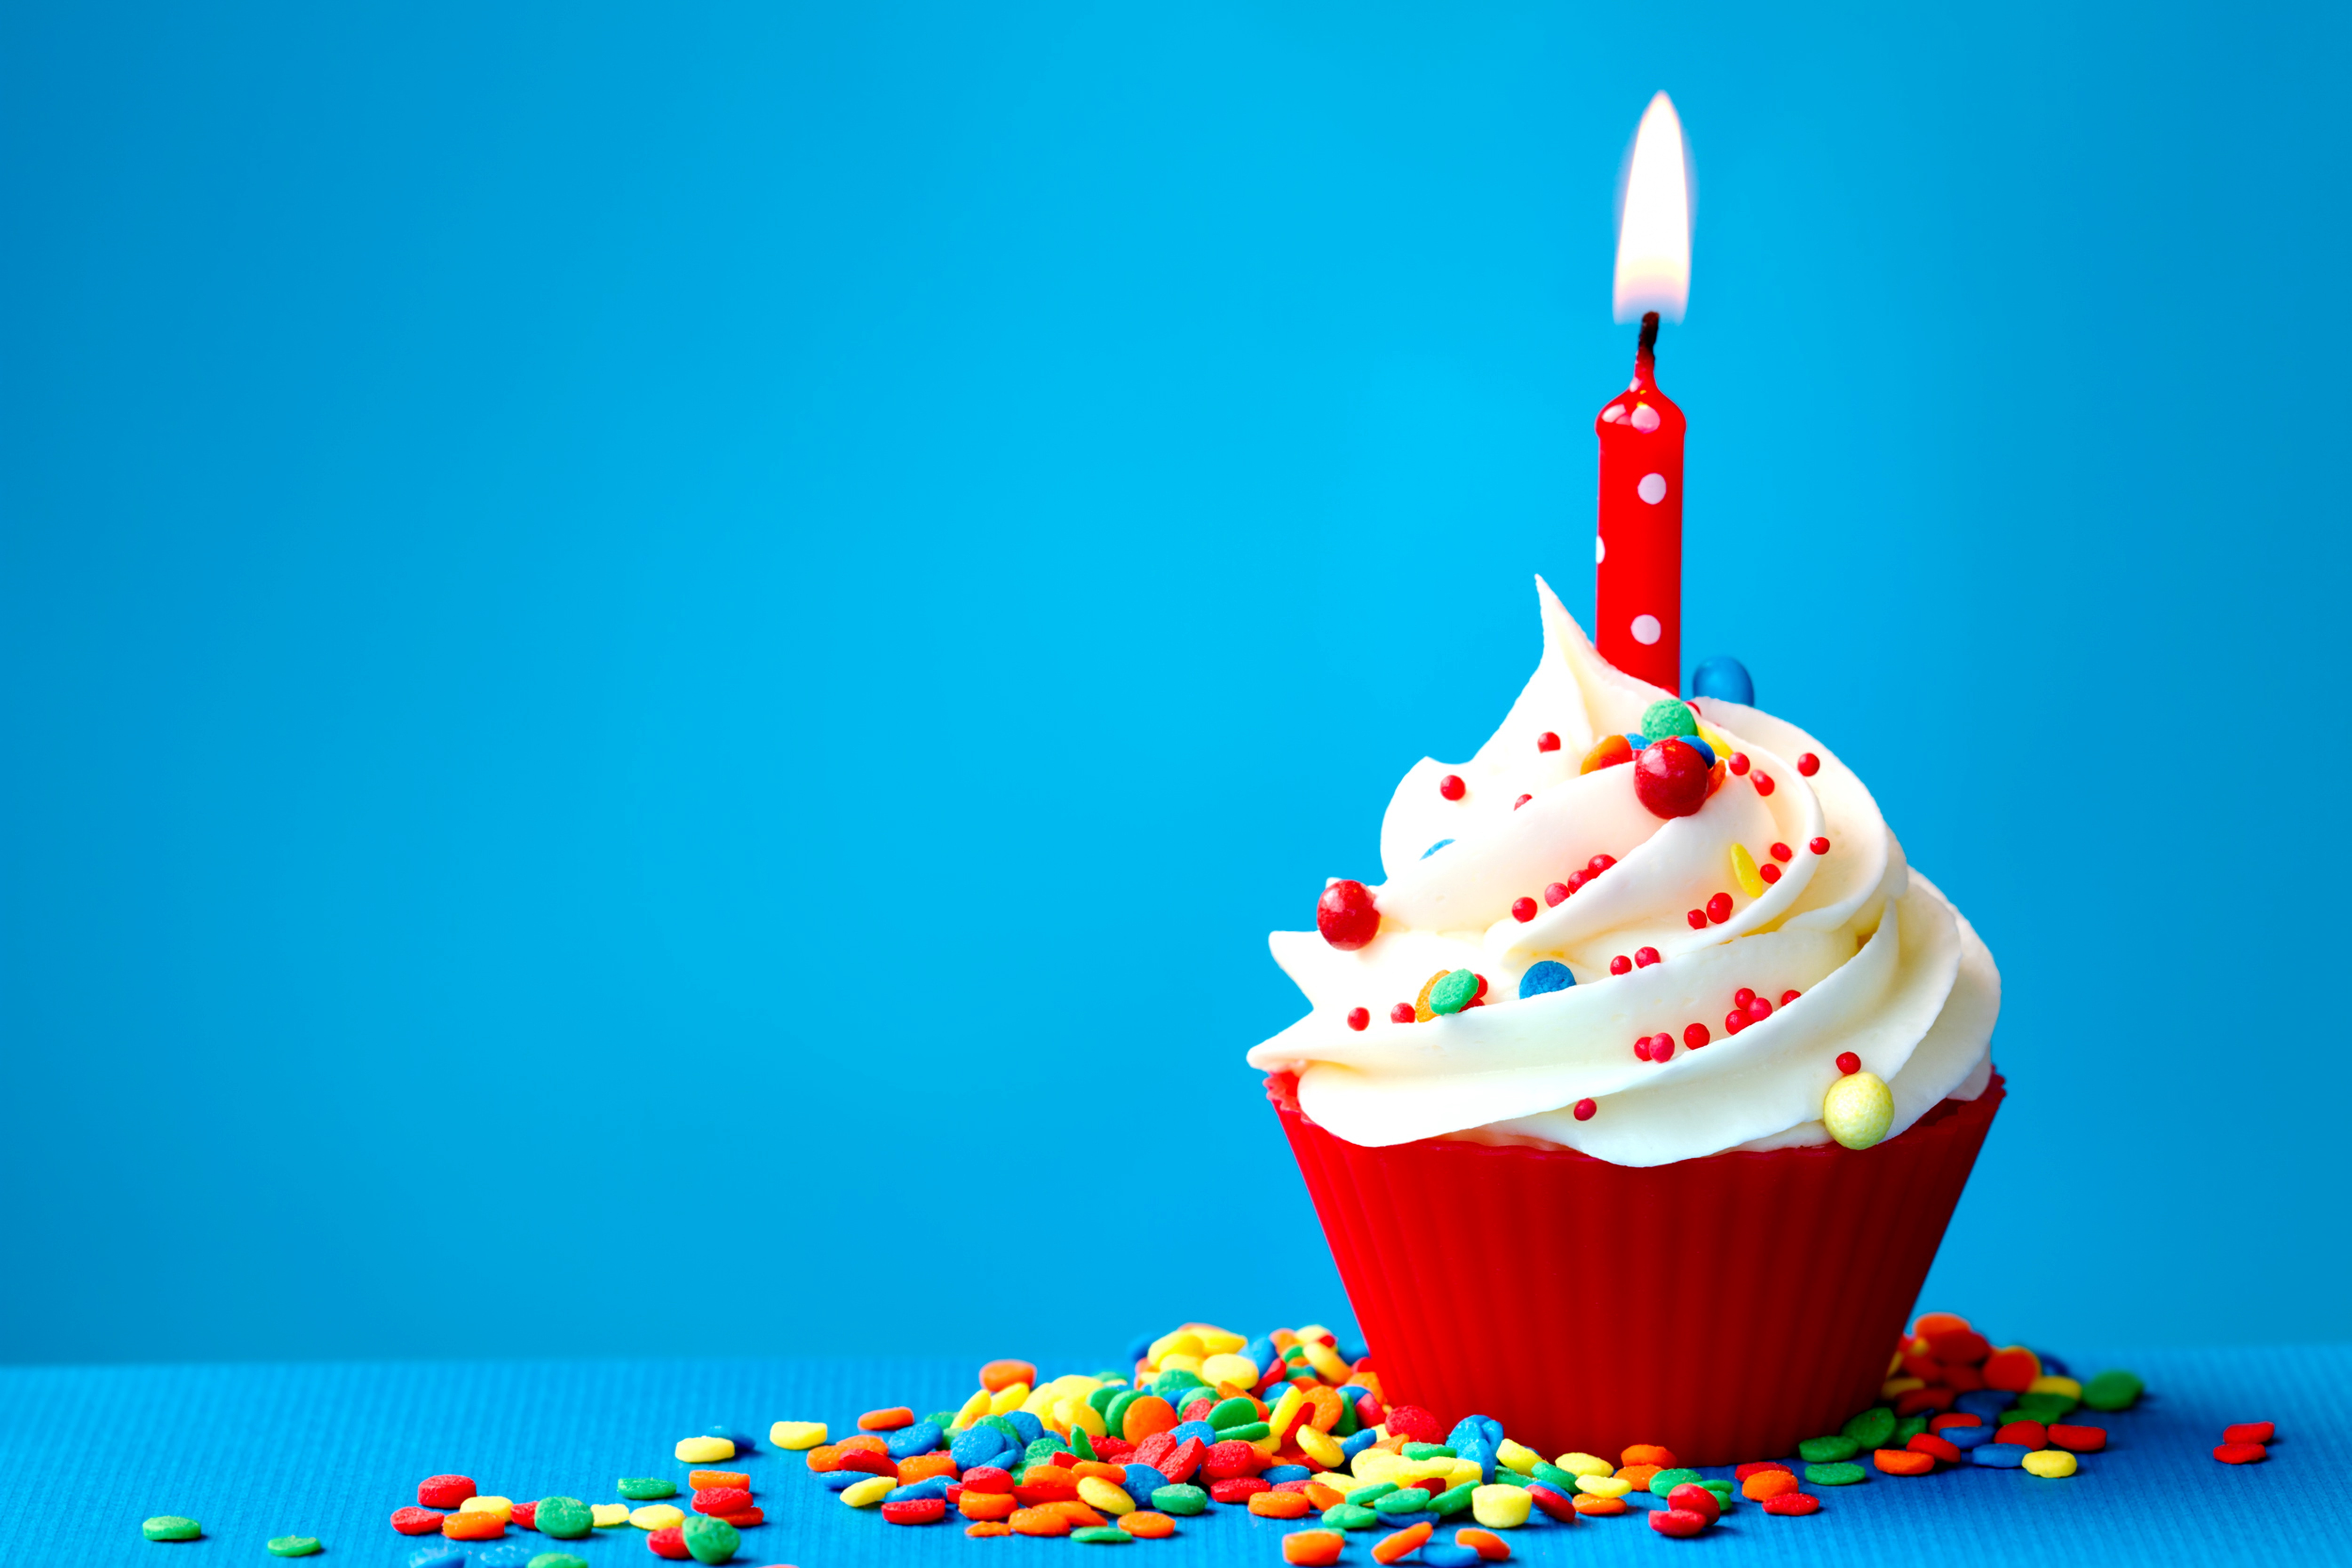 Free download Birthday wallpaper and gifs [5000x3334] for your Desktop, Mobile & Tablet. Explore Birthday Background Image. Happy Birthday Wallpaper Image, Free Birthday Wallpaper